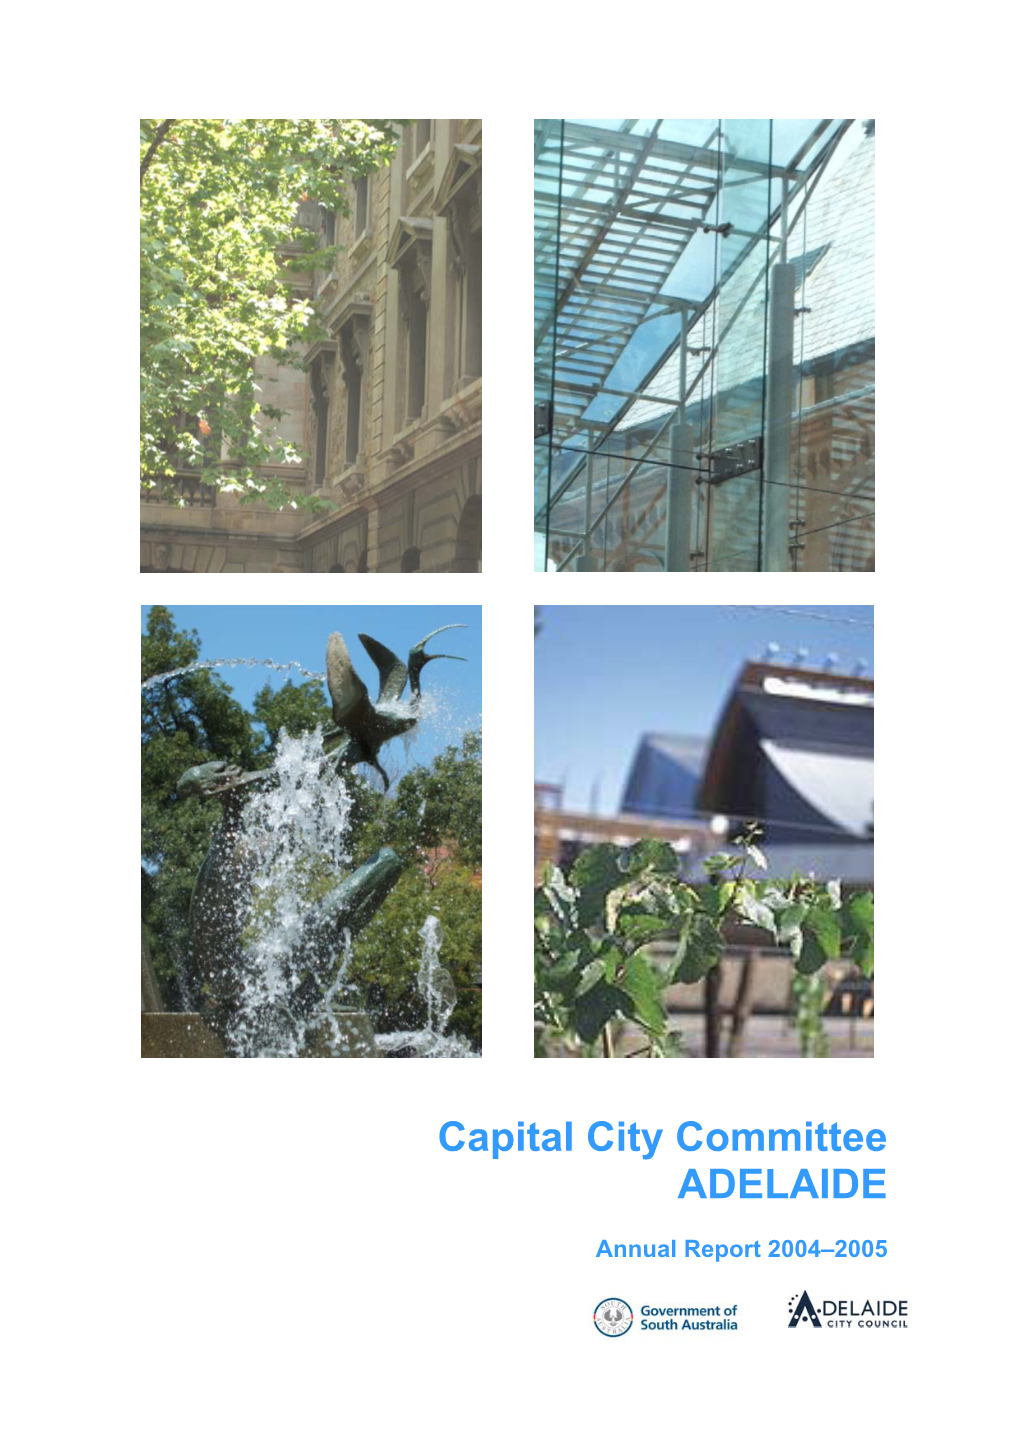 Capital City Committee Annual Report 2004-2005